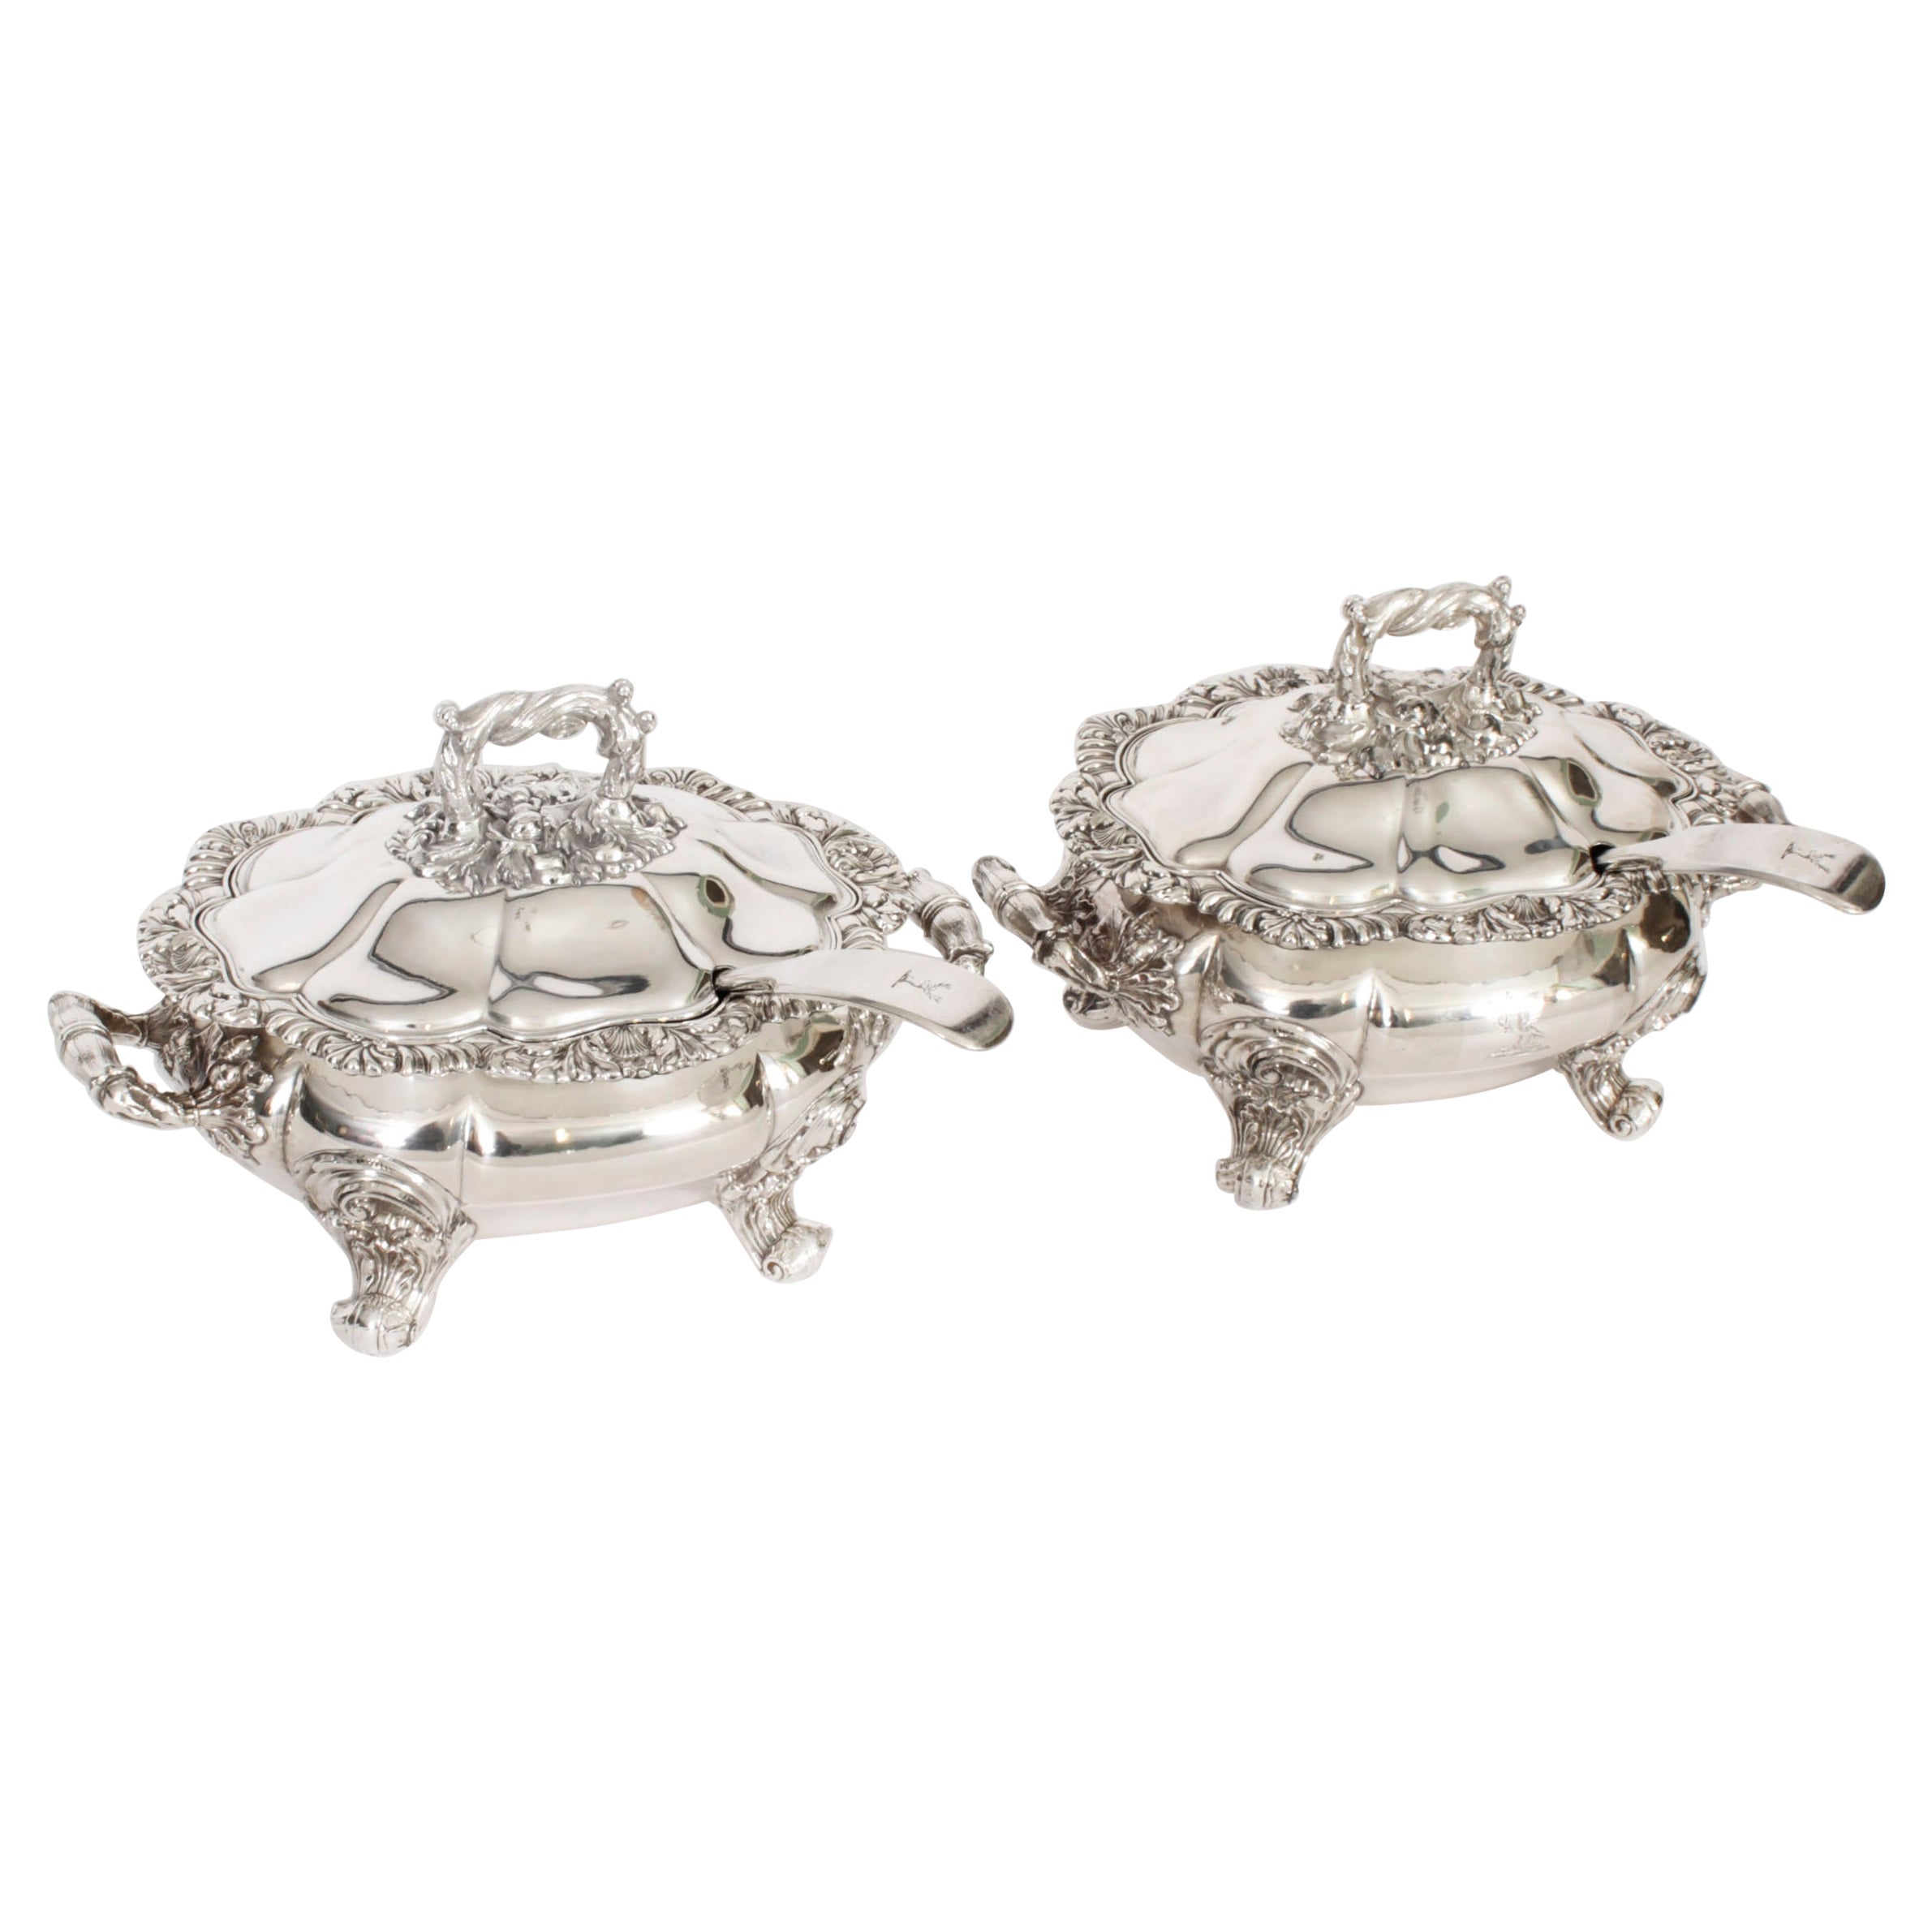 Antique Pair Old Sheffield Oval Lidded Sauce Tureens C1820 19th Century For Sale